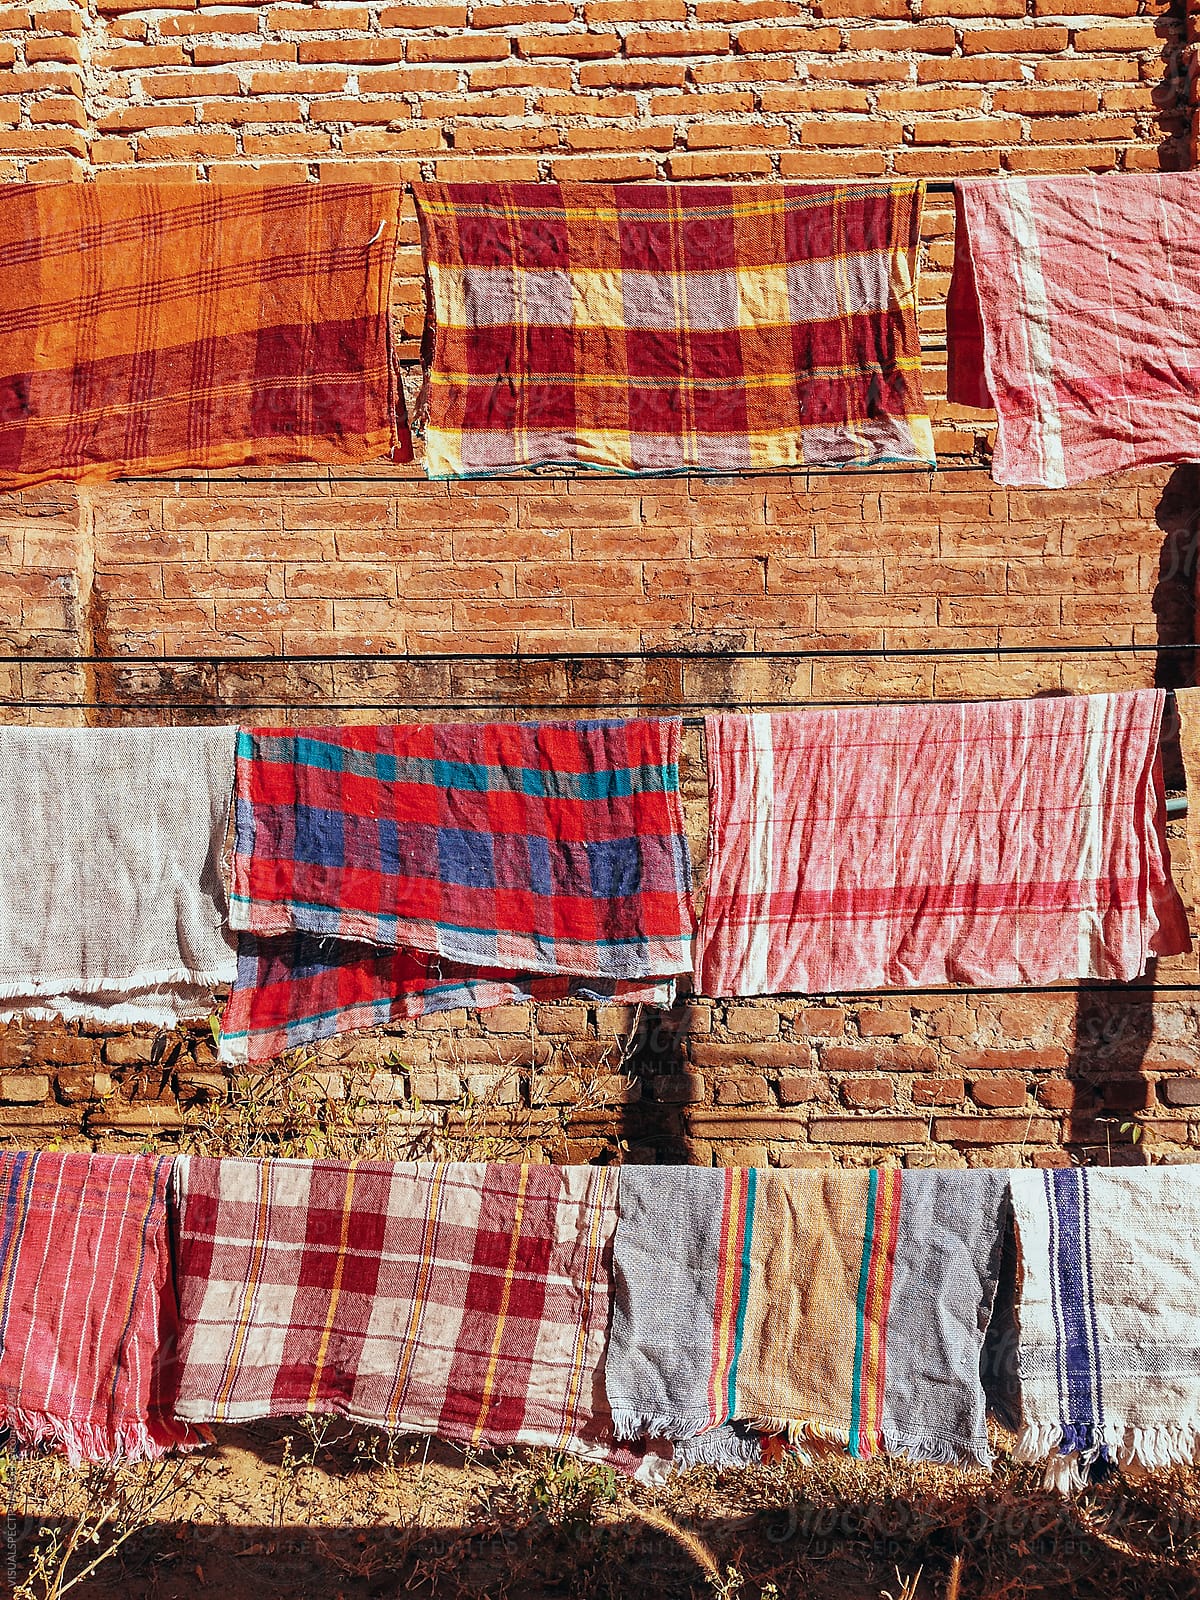 Colorful Cotton Towels Drying in Sun on Clothes Line